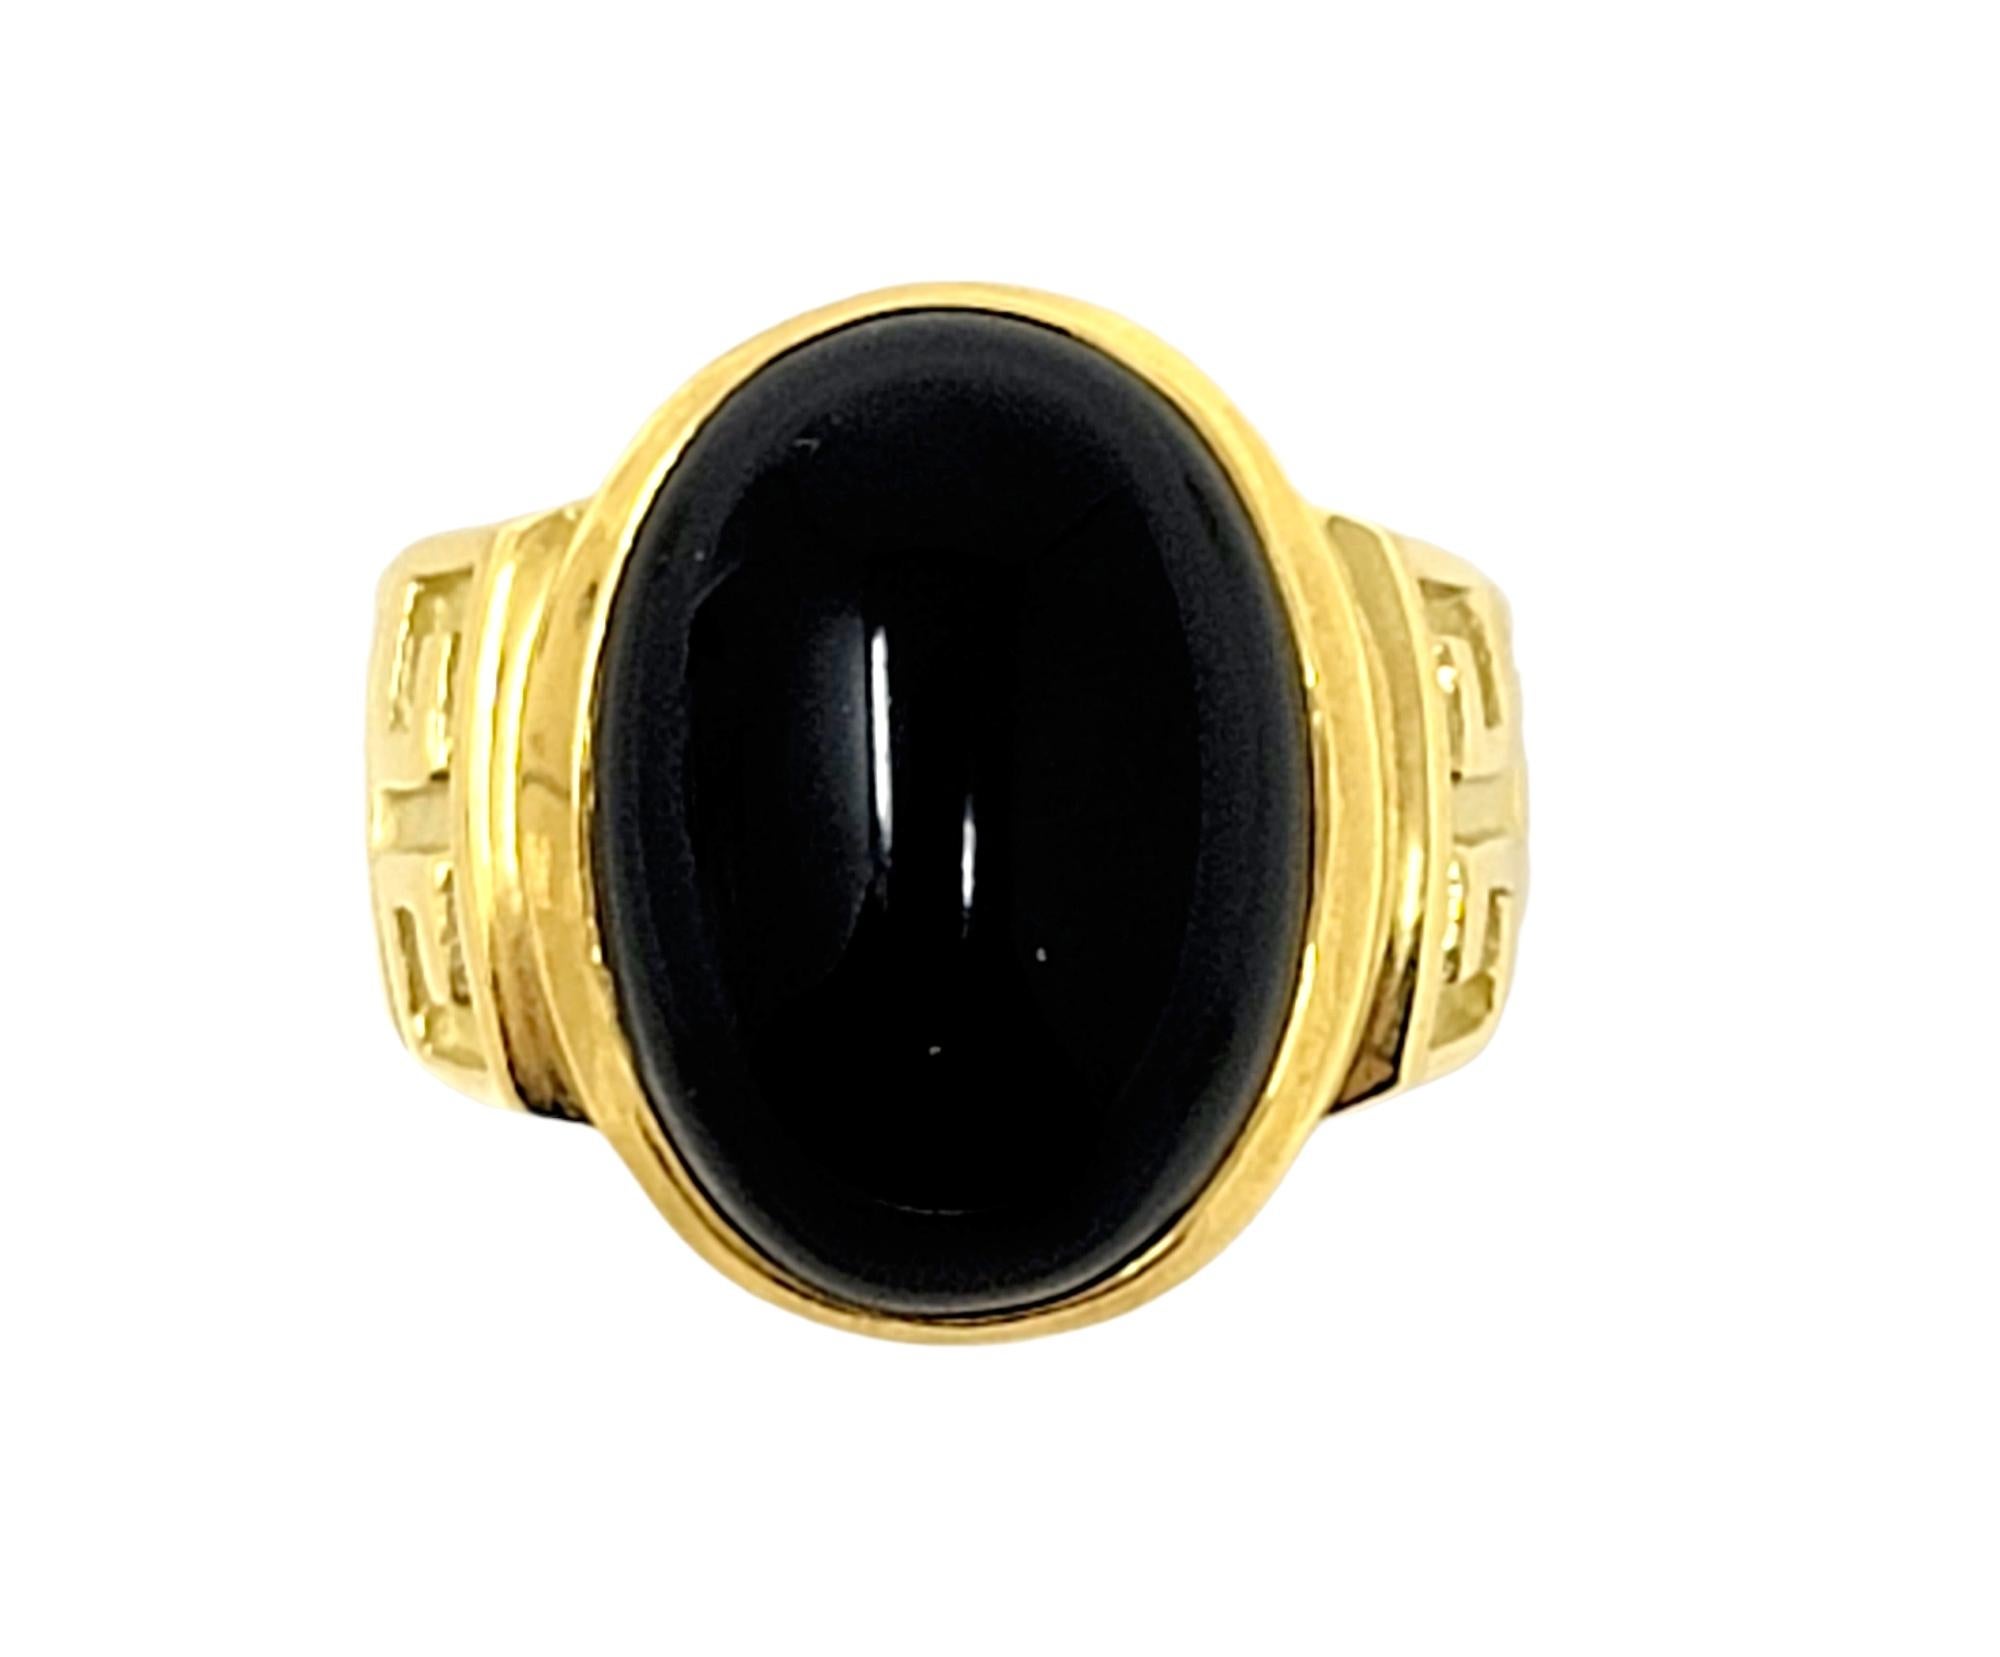 Ring size: 5.25

Chic black onyx ring will make a great addition to your jewelry wardrobe. The classic black and gold color palette will go with just about everything and can be dressed up or down. Features a large, high polished  cabochon black